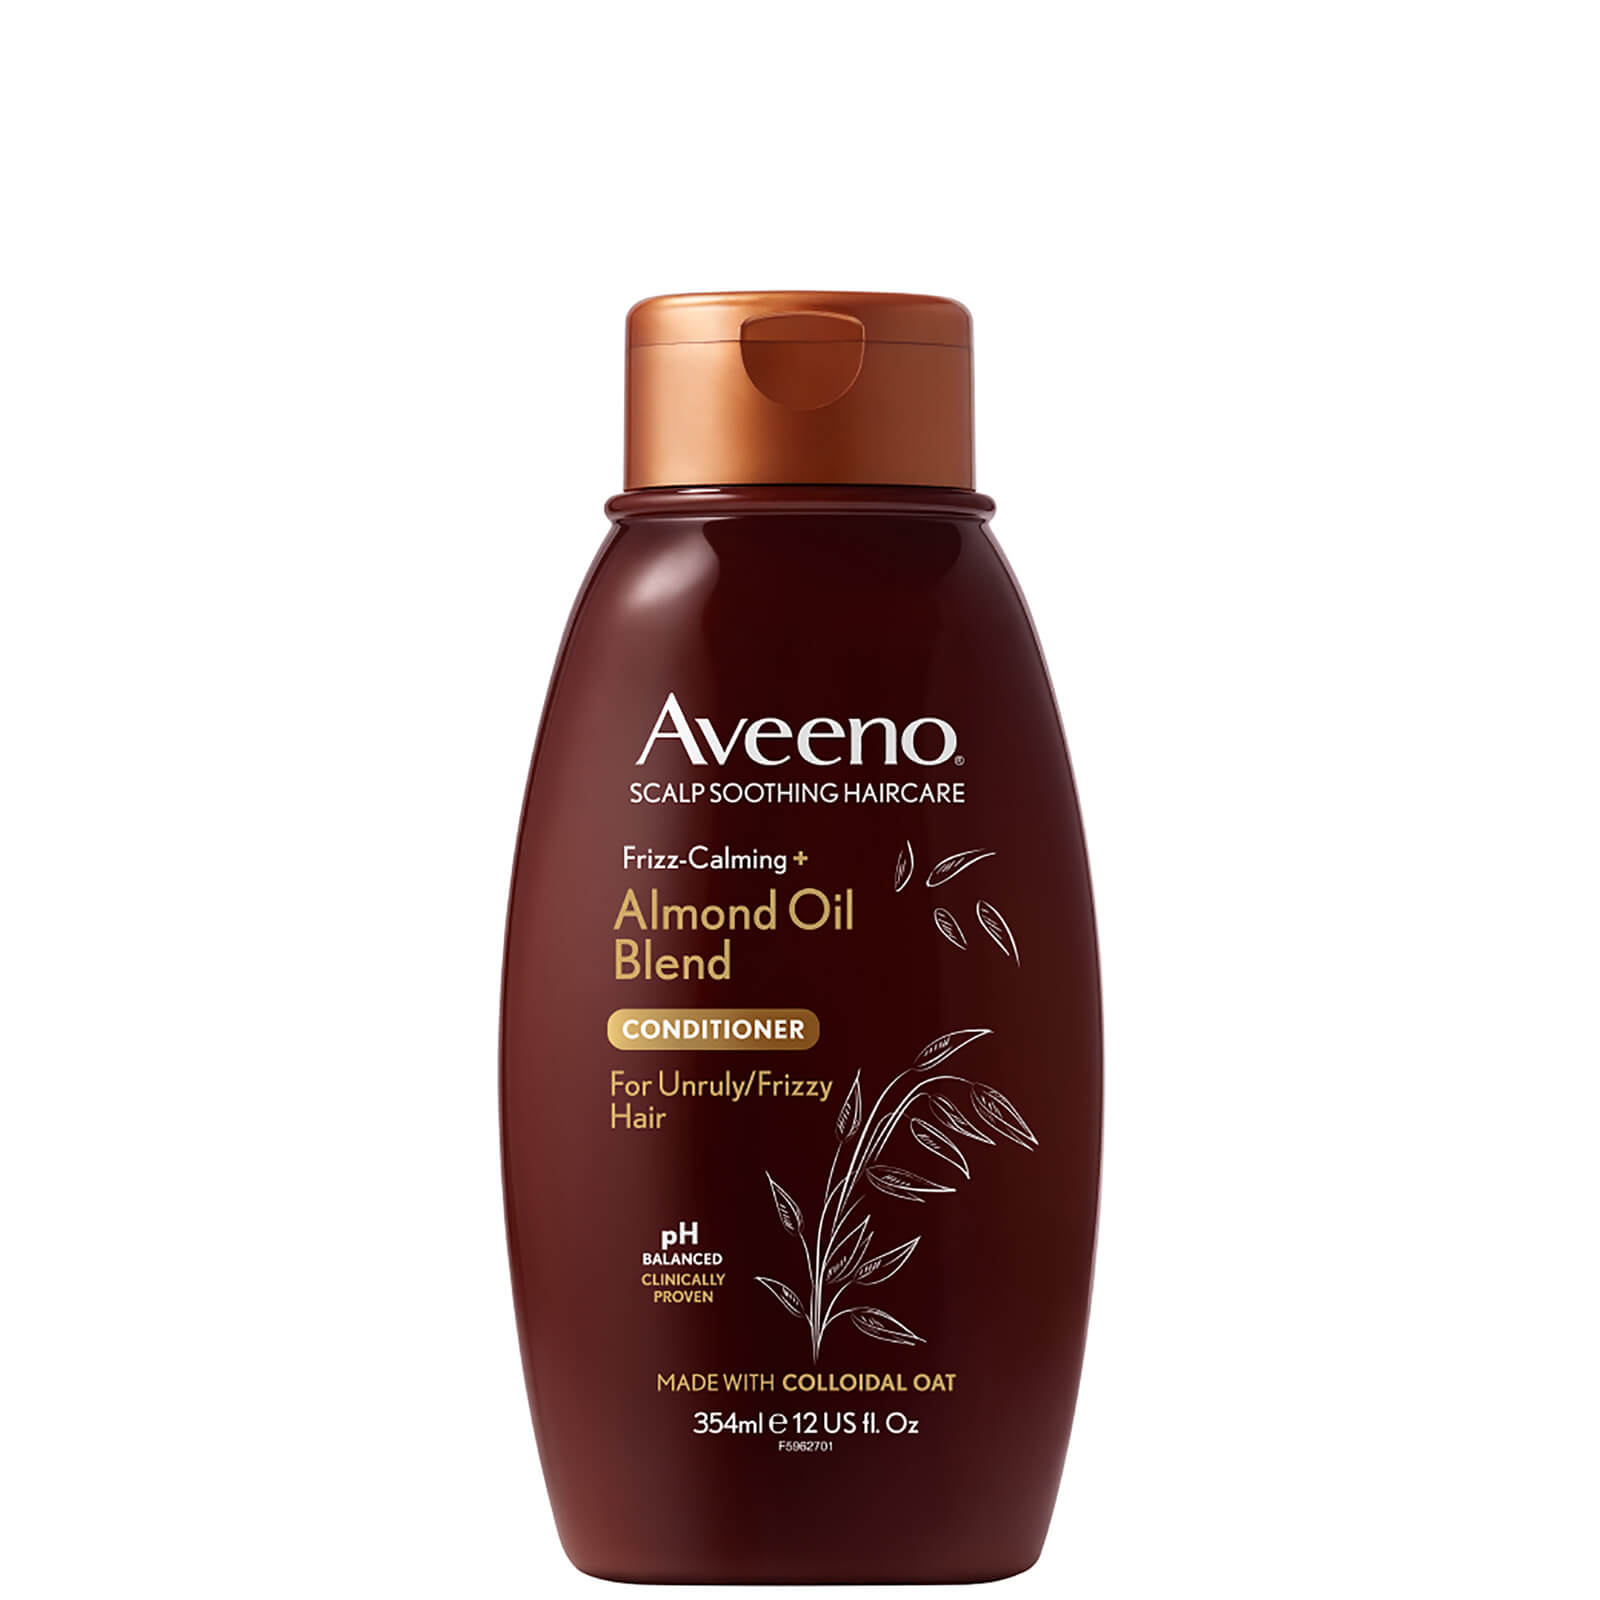 Aveeno Scalp Soothing Haircare Frizz Calming Almond Oil Blend Conditioner 354ml